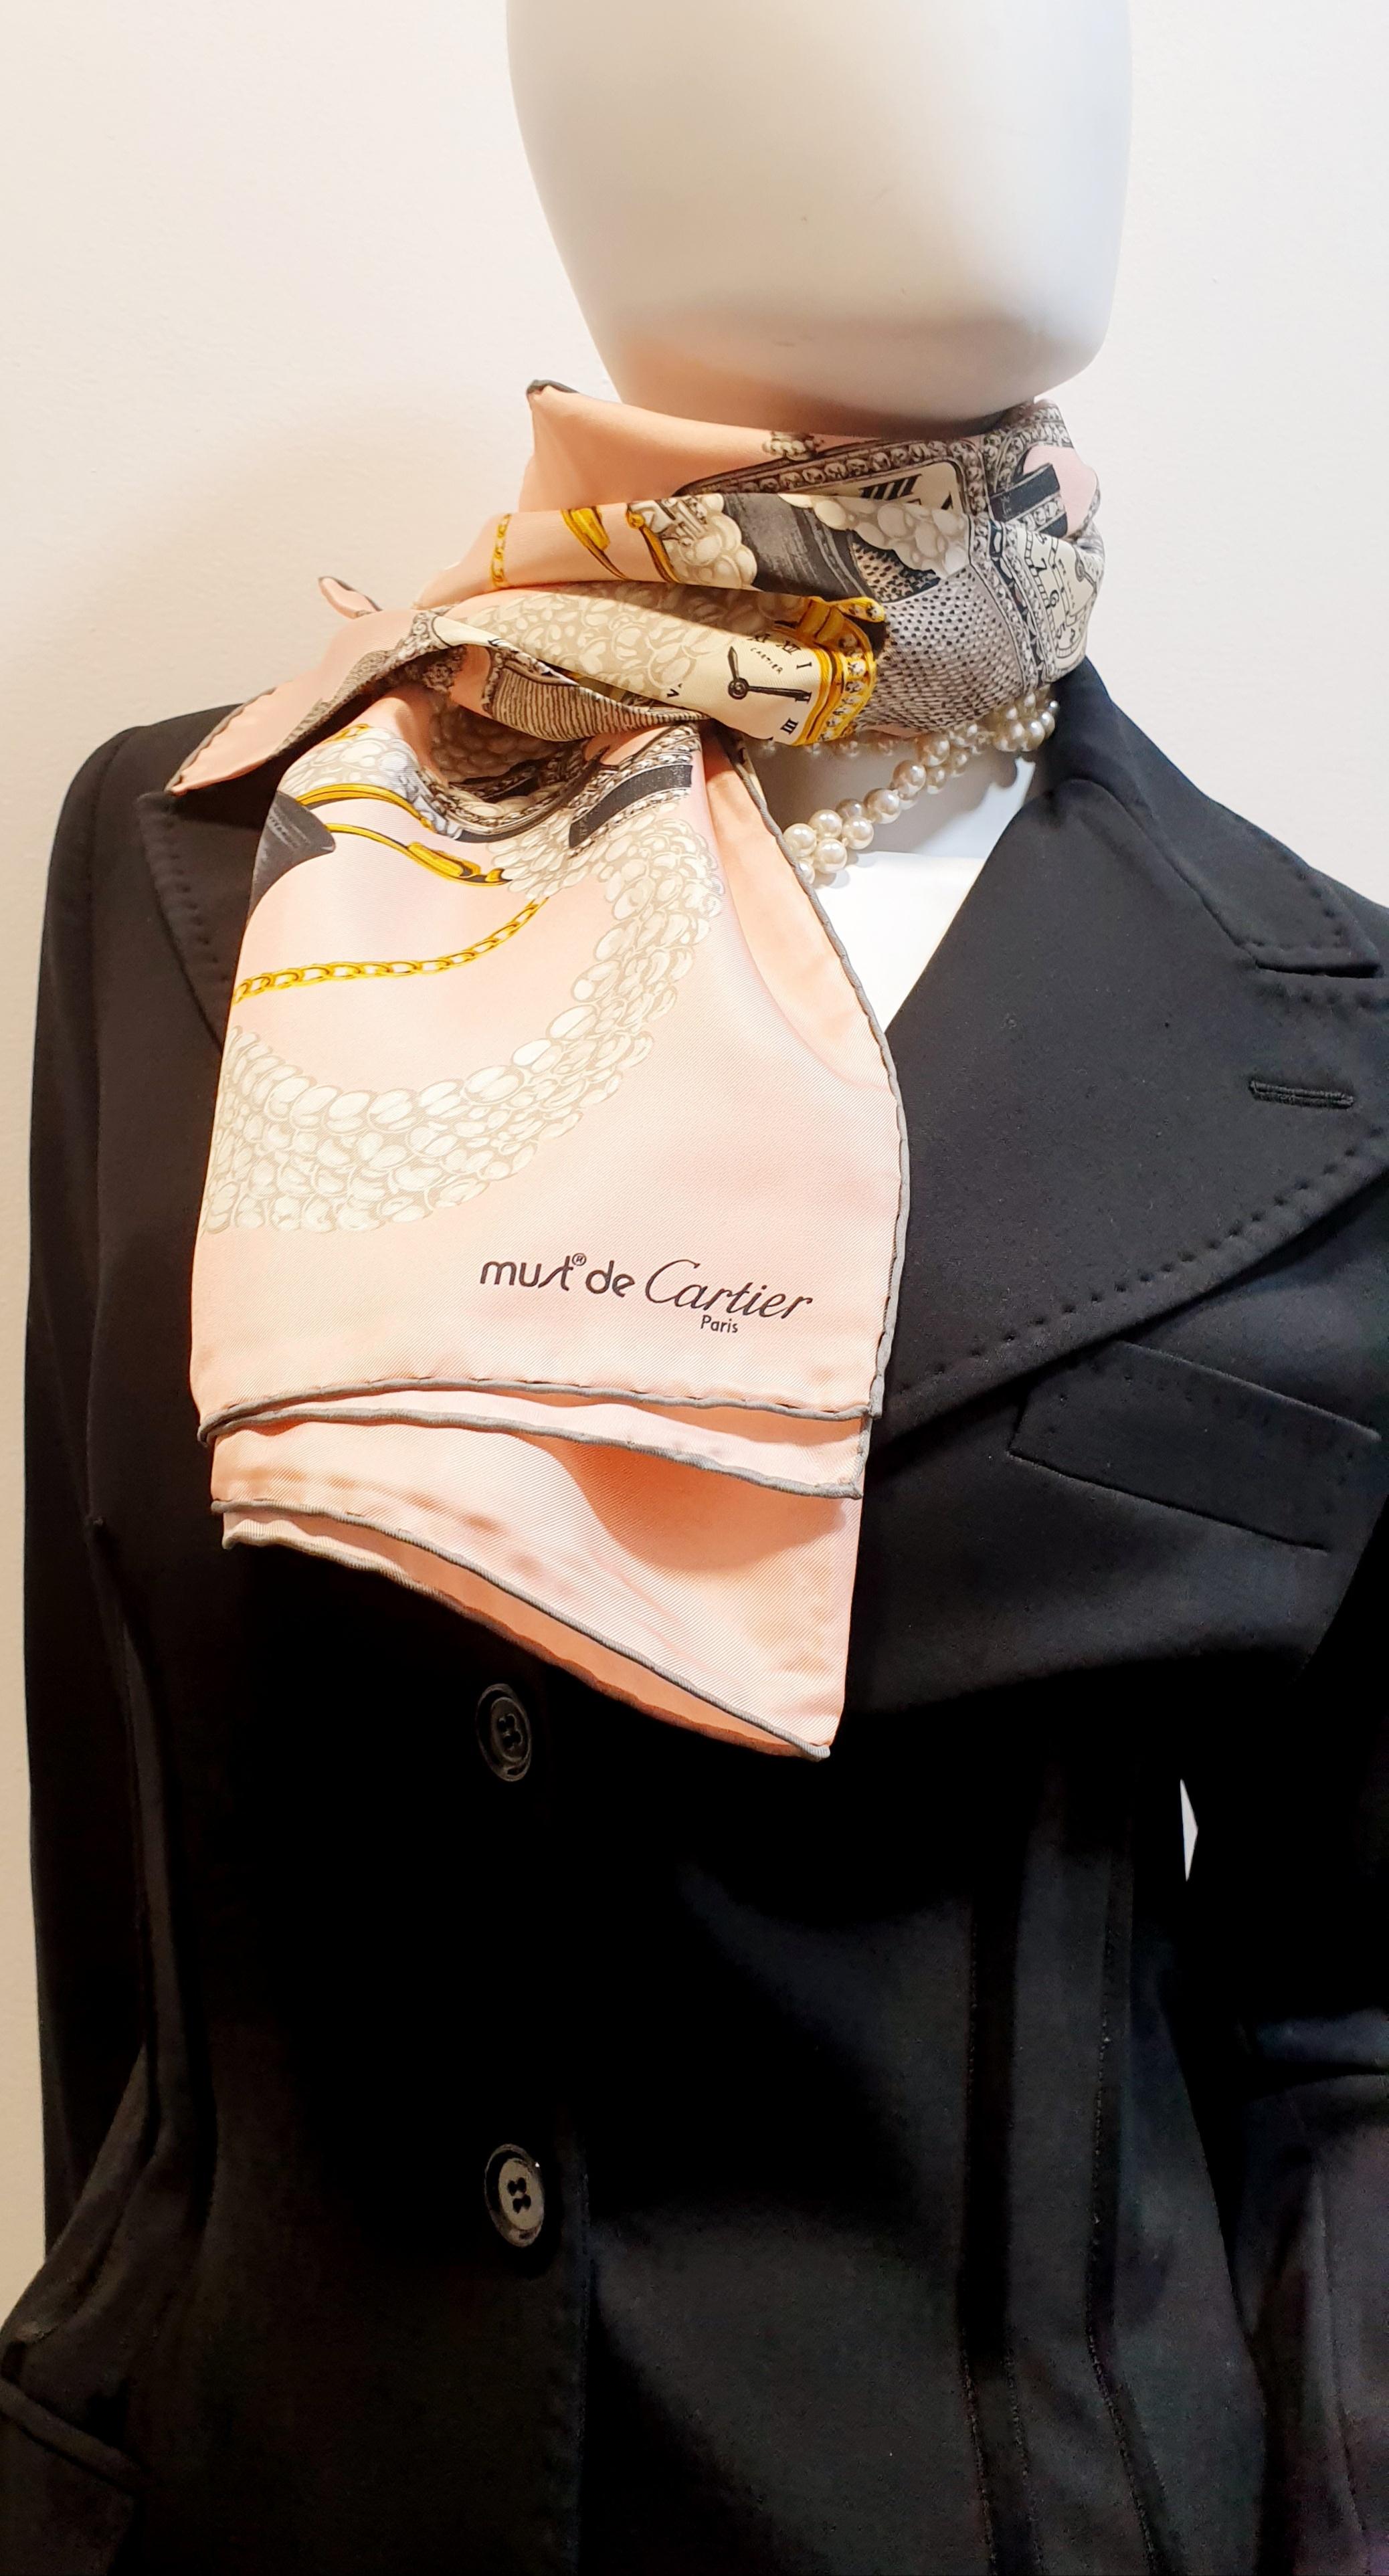 New Le must de Cartier silk salmon scarf with precious watches designed  1